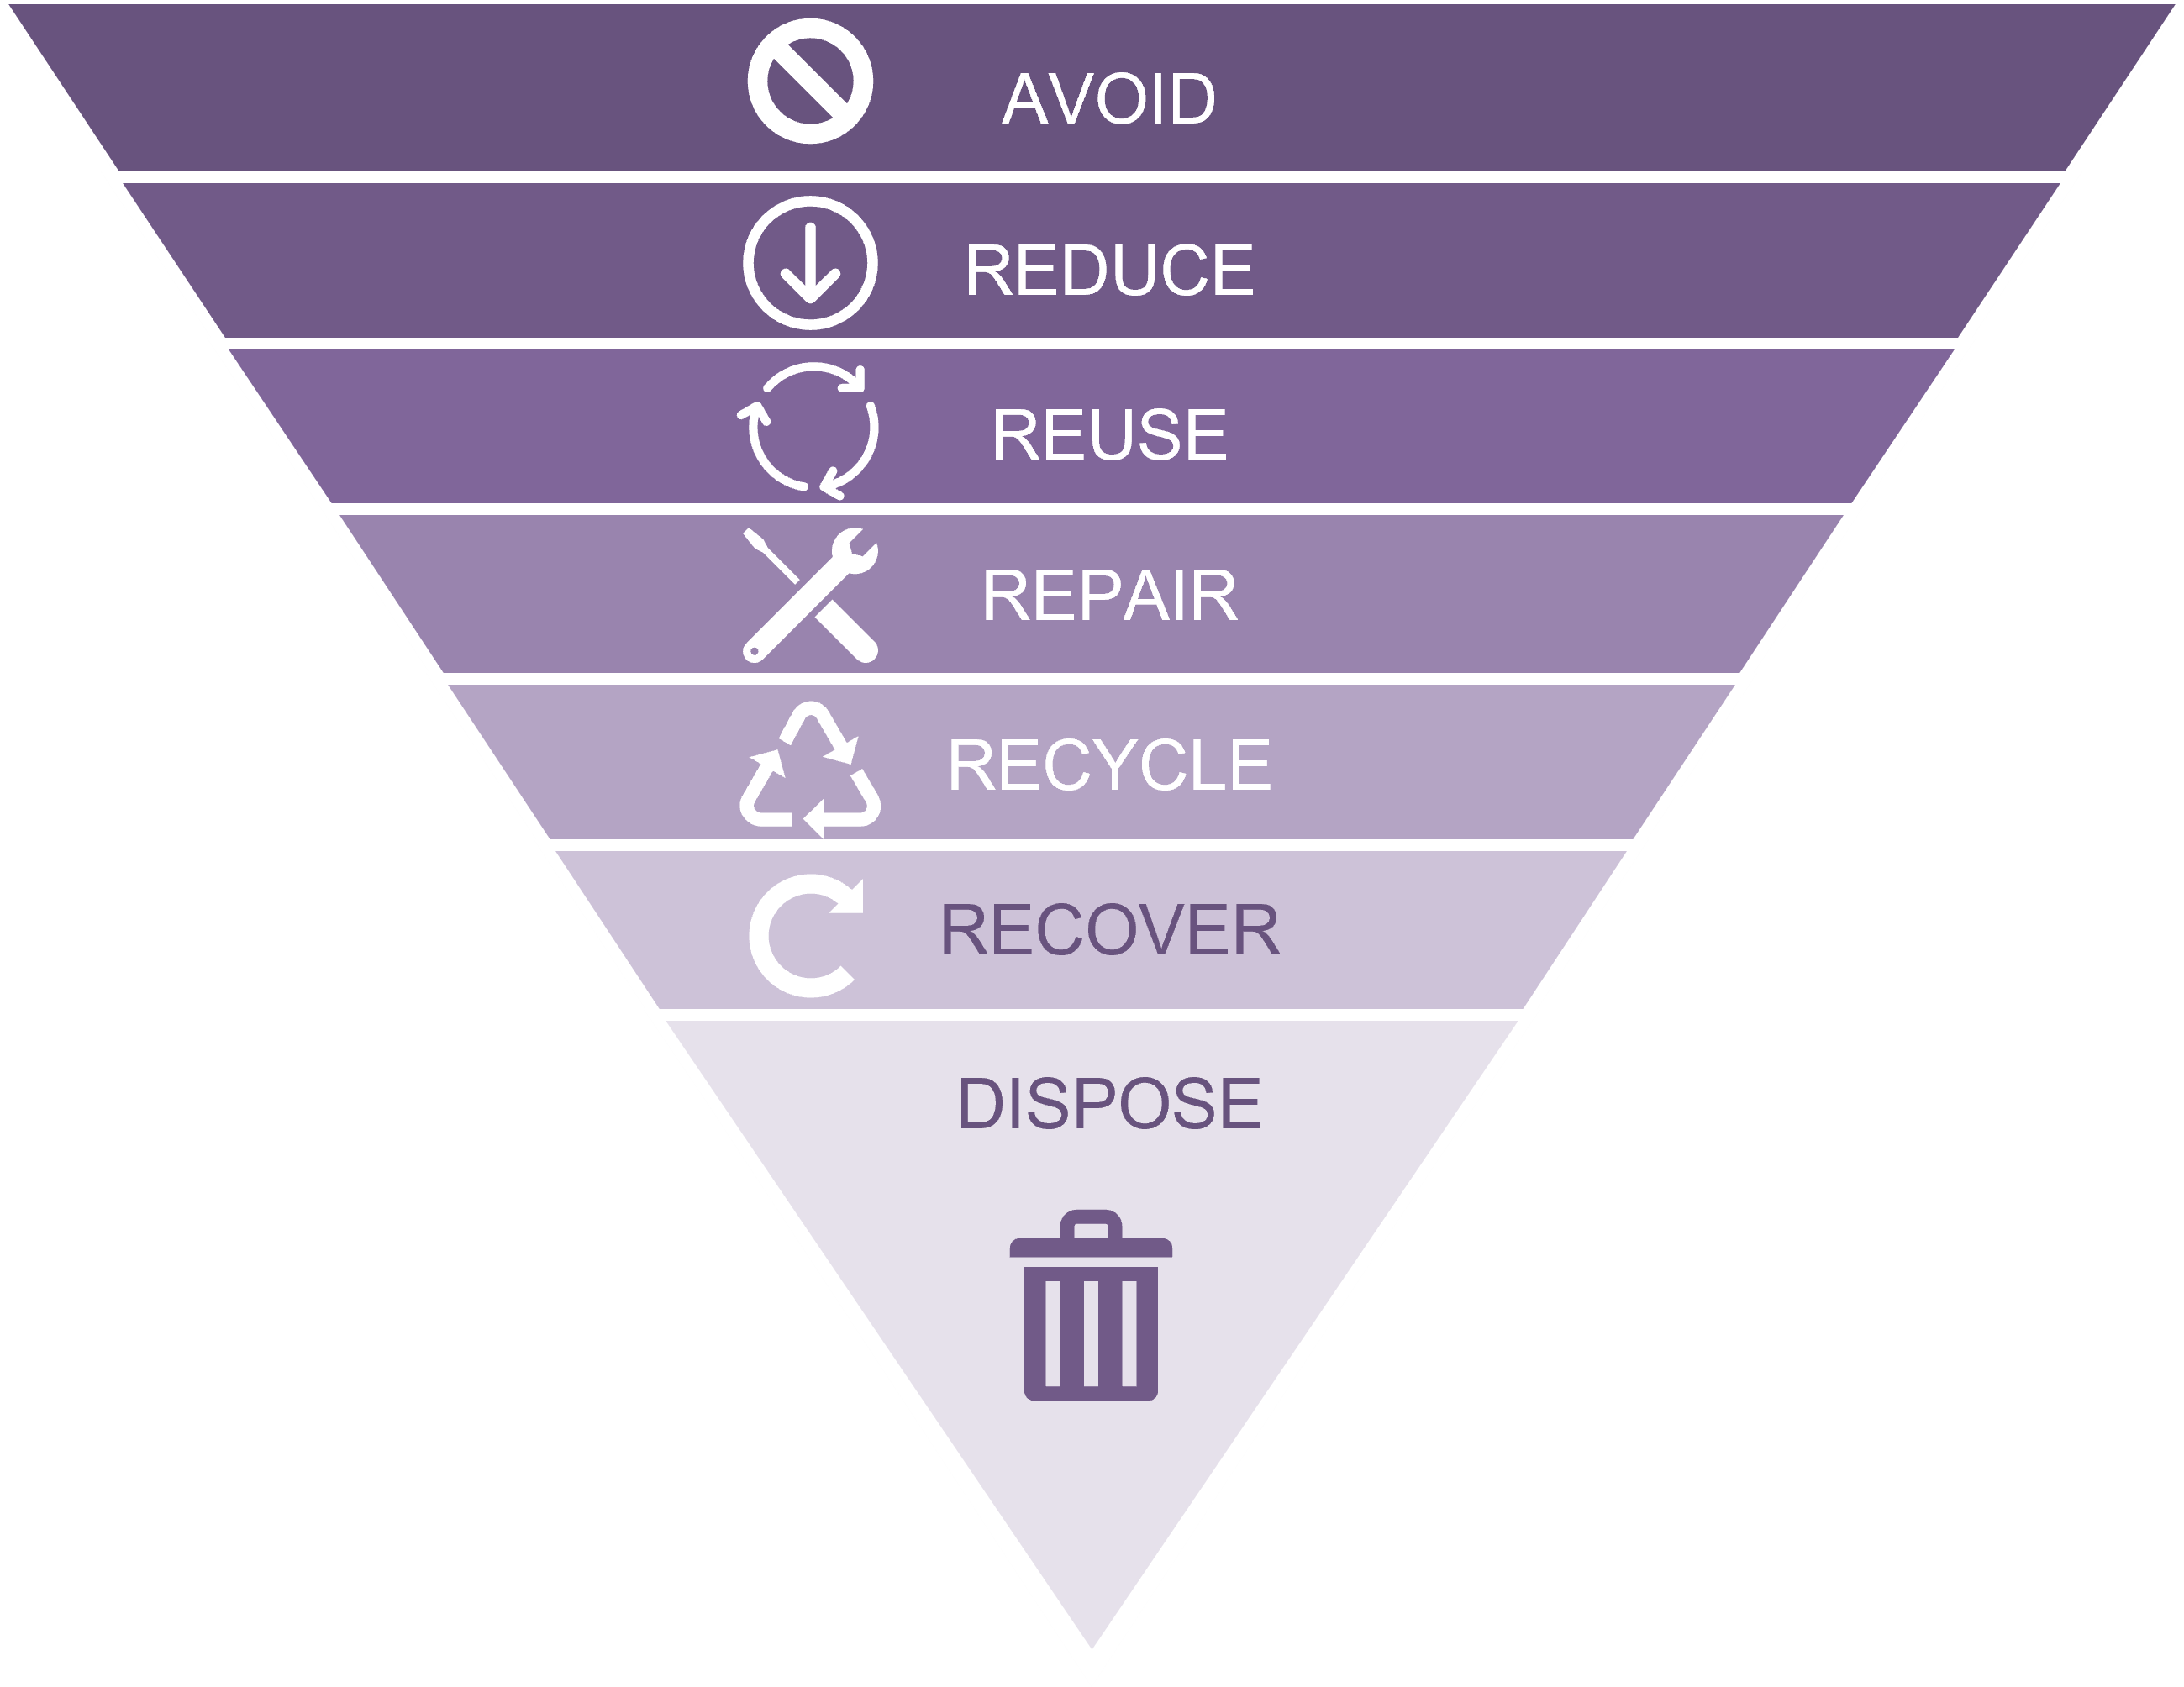 Waste hierarchy, from greatest to least: Avoid, Reduce, Reuse, Repair, Recycle, Recover, Dispose.